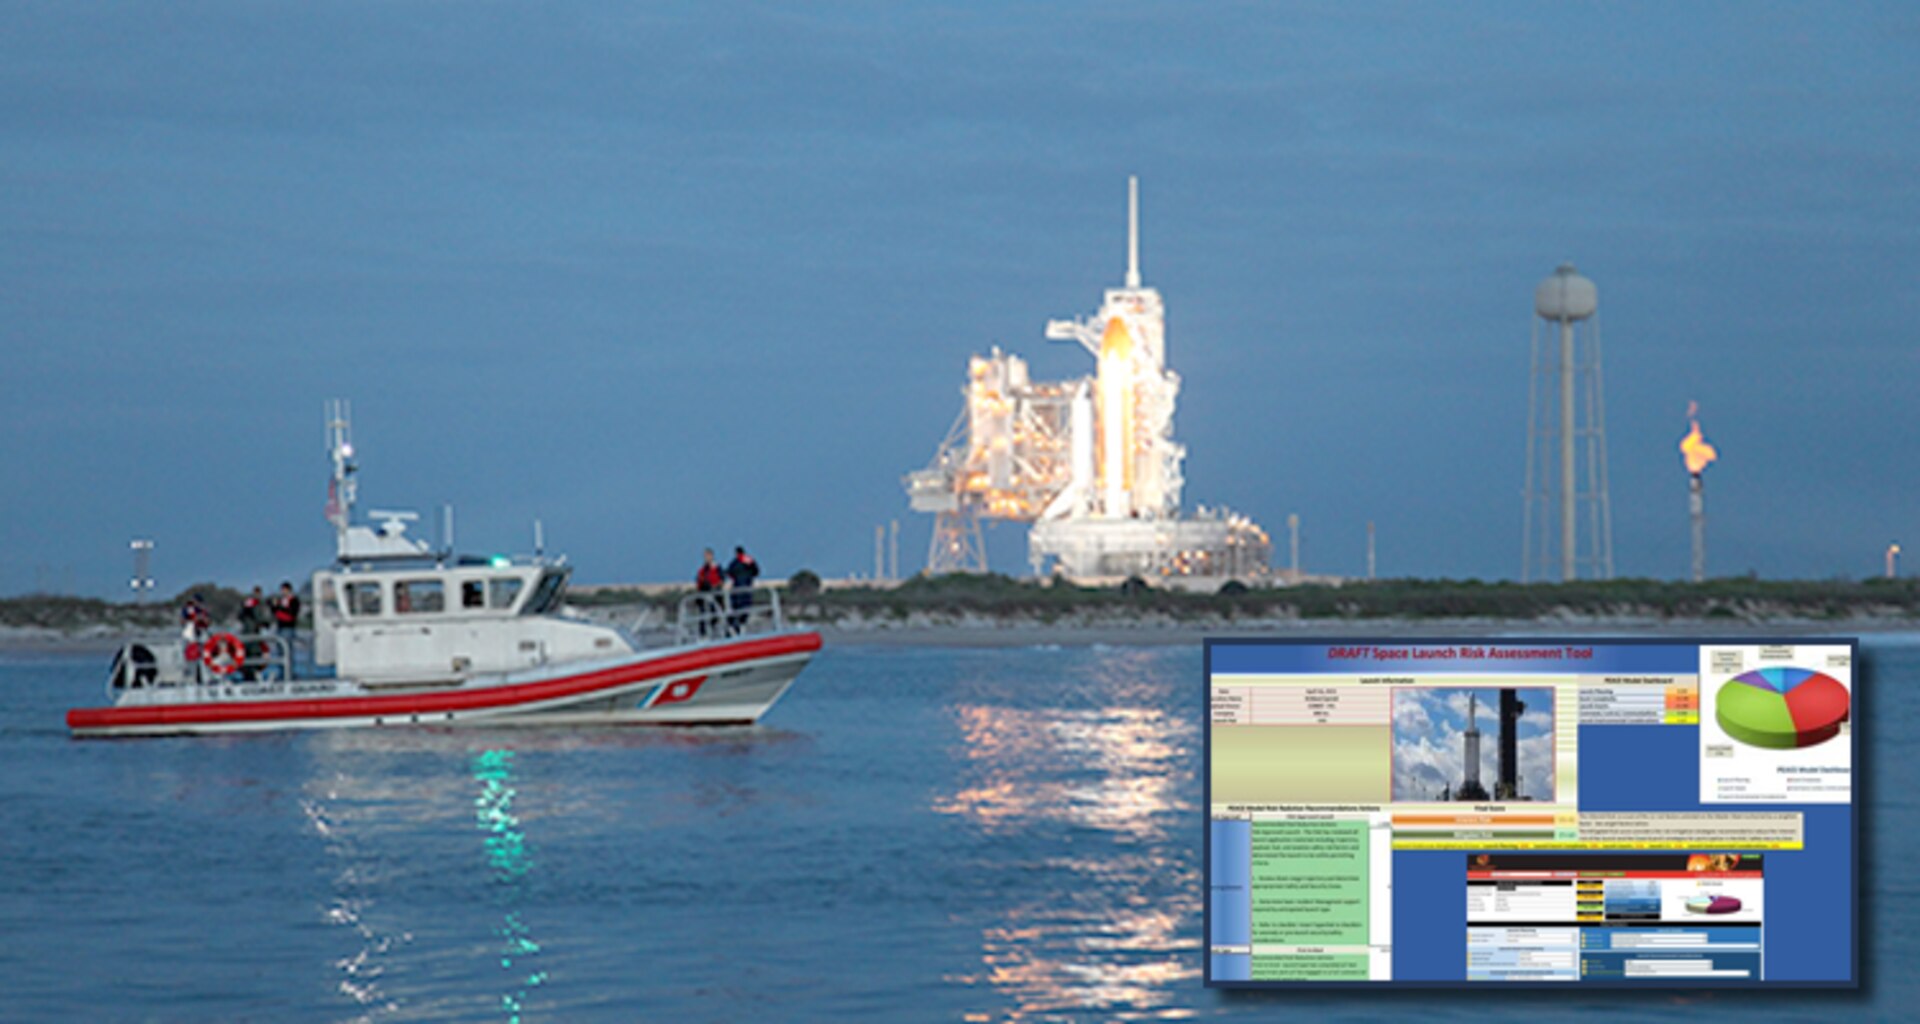 A boatcrew from Station Port Canaveral, Florida, supports a launch. The inset shows screen captures of Space Launch Risk Assessment Tool data.